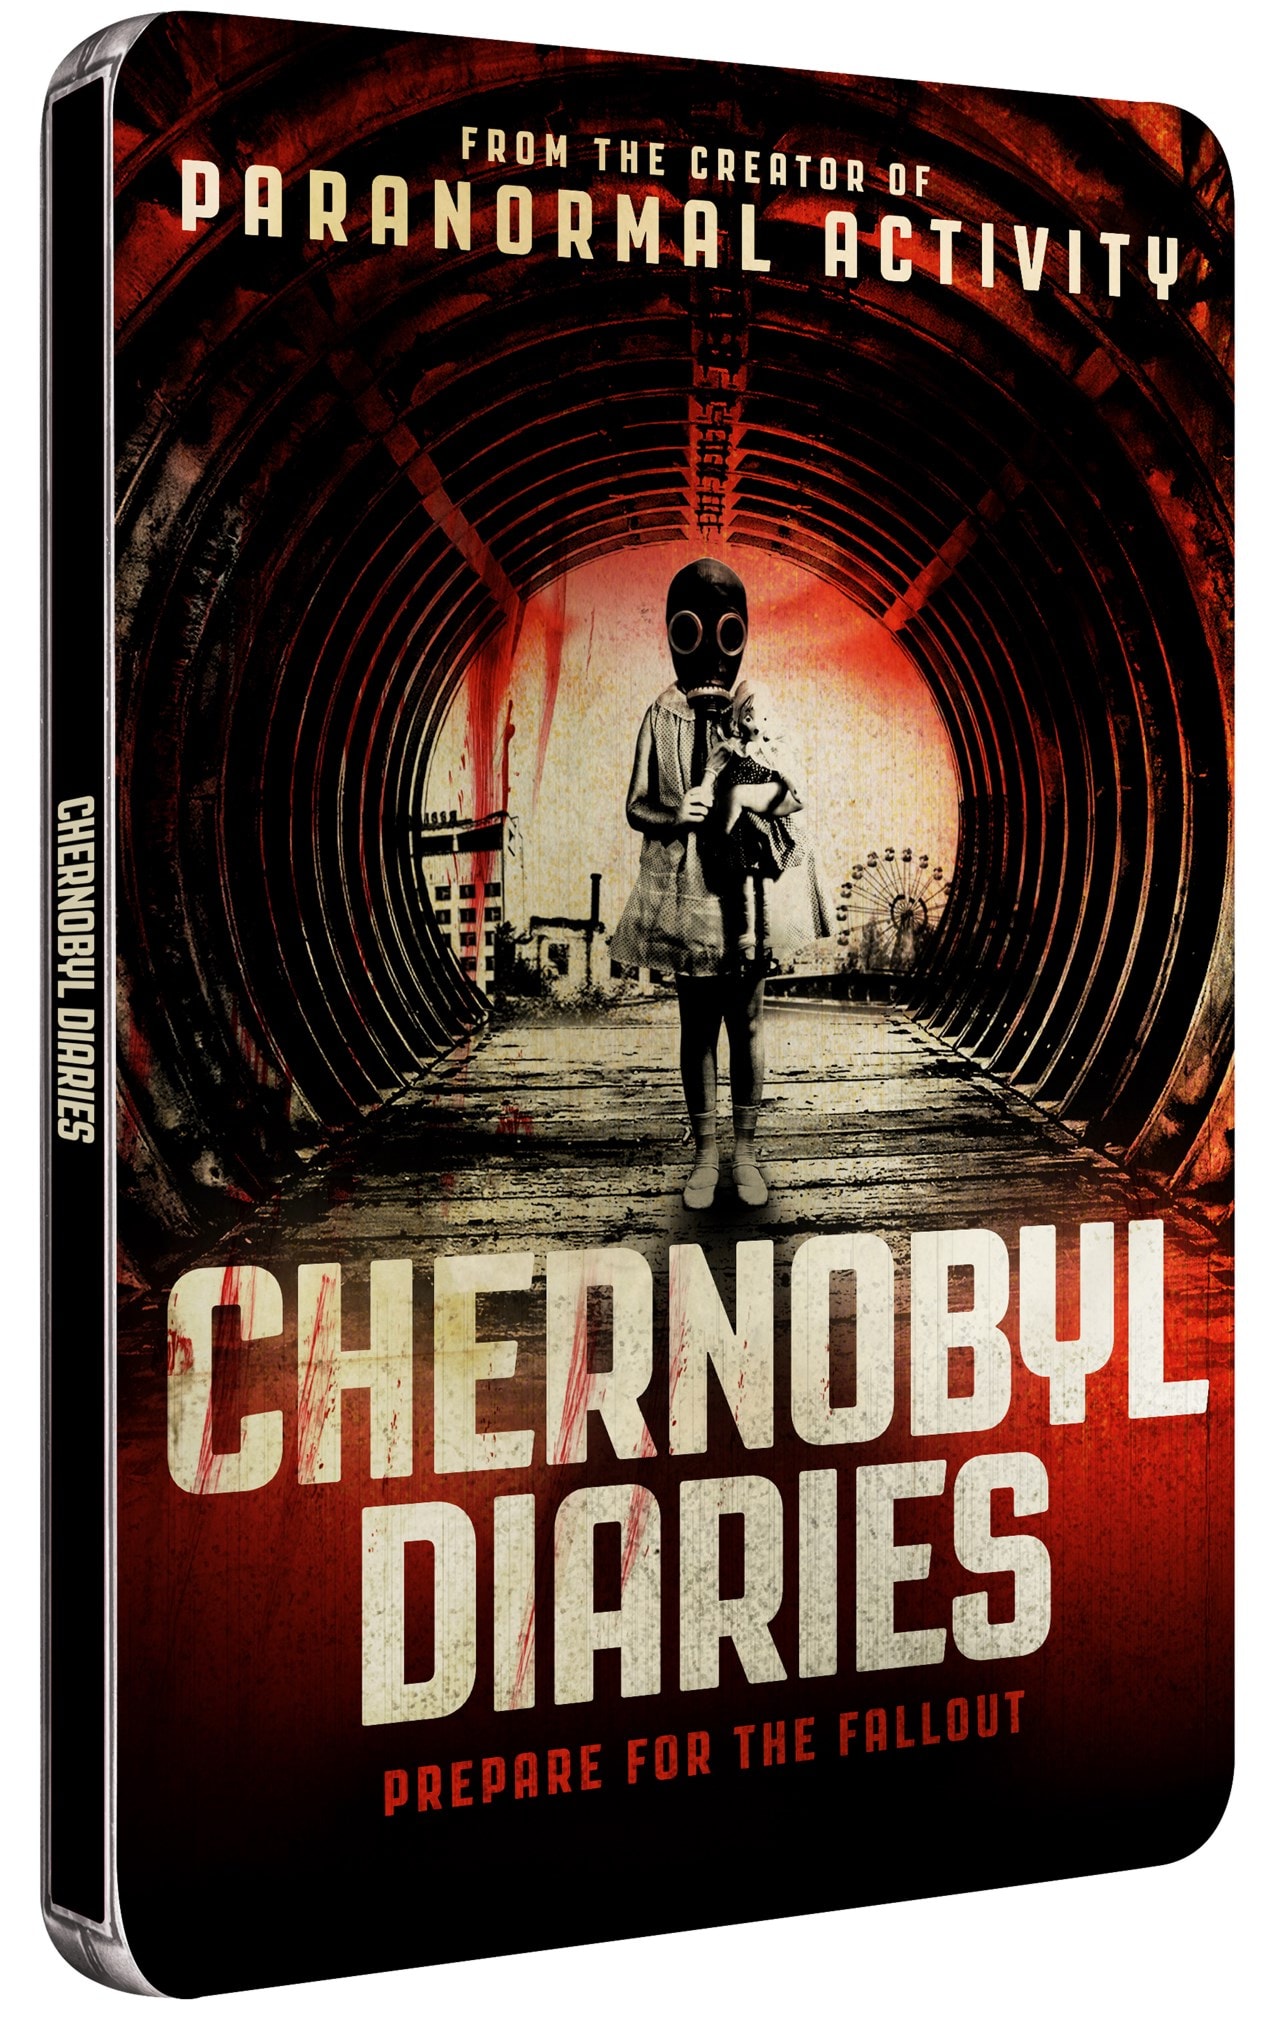 download heart of chernobyl release date